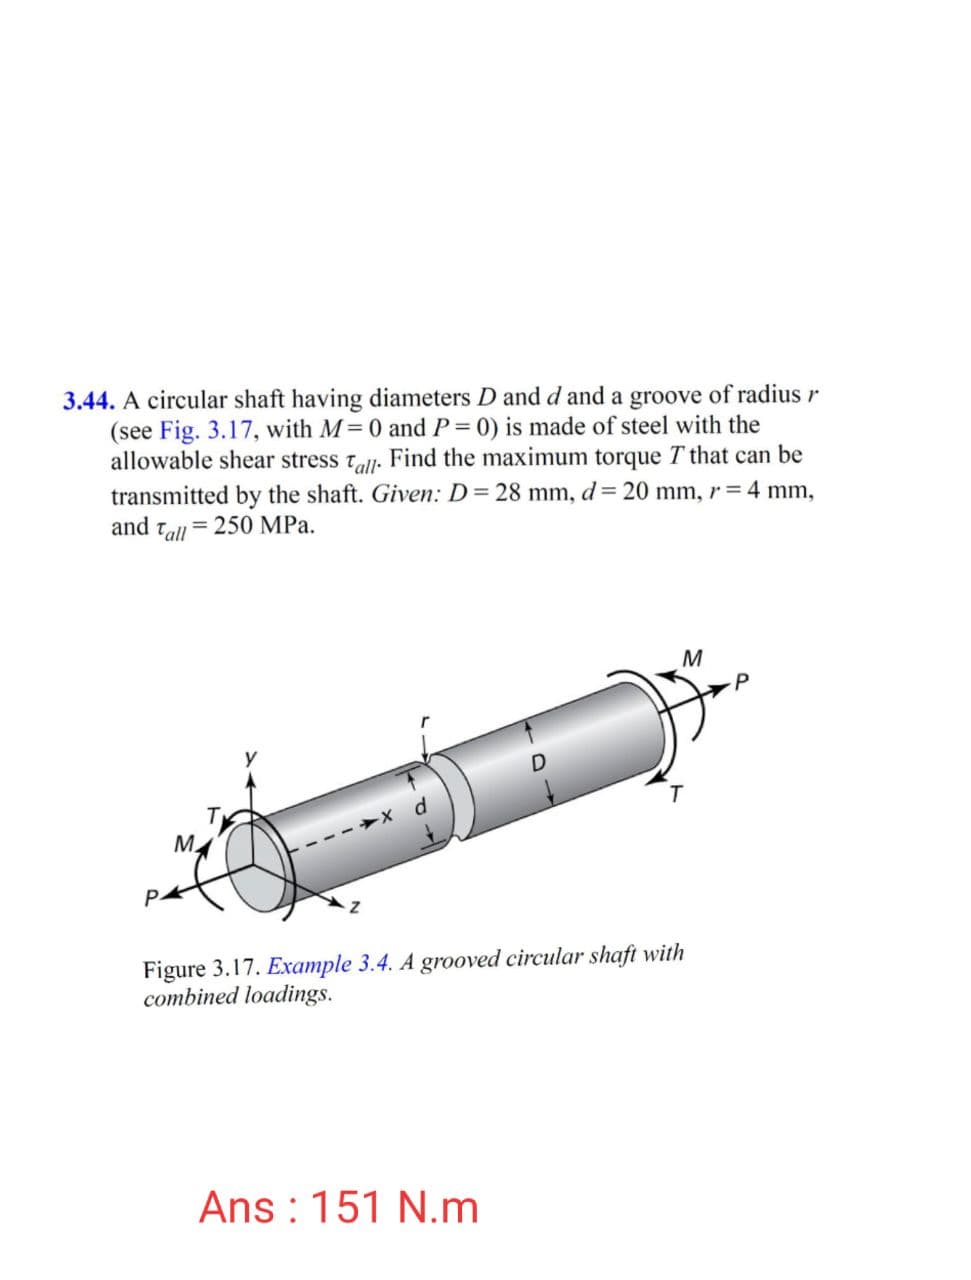 3.44. A circular shaft having diameters D and d and a groove of radius r
(see Fig. 3.17, with M= 0 and P = 0) is made of steel with the
allowable shear stress tall. Find the maximum torque T that can be
transmitted by the shaft. Given: D= 28 mm, d= 20 mm, r = 4 mm,
and tall = 250 MPa.
M
M.
Figure 3.17. Example 3.4. A grooved circular shaft with
combined loadings.
Ans : 151 N.m
